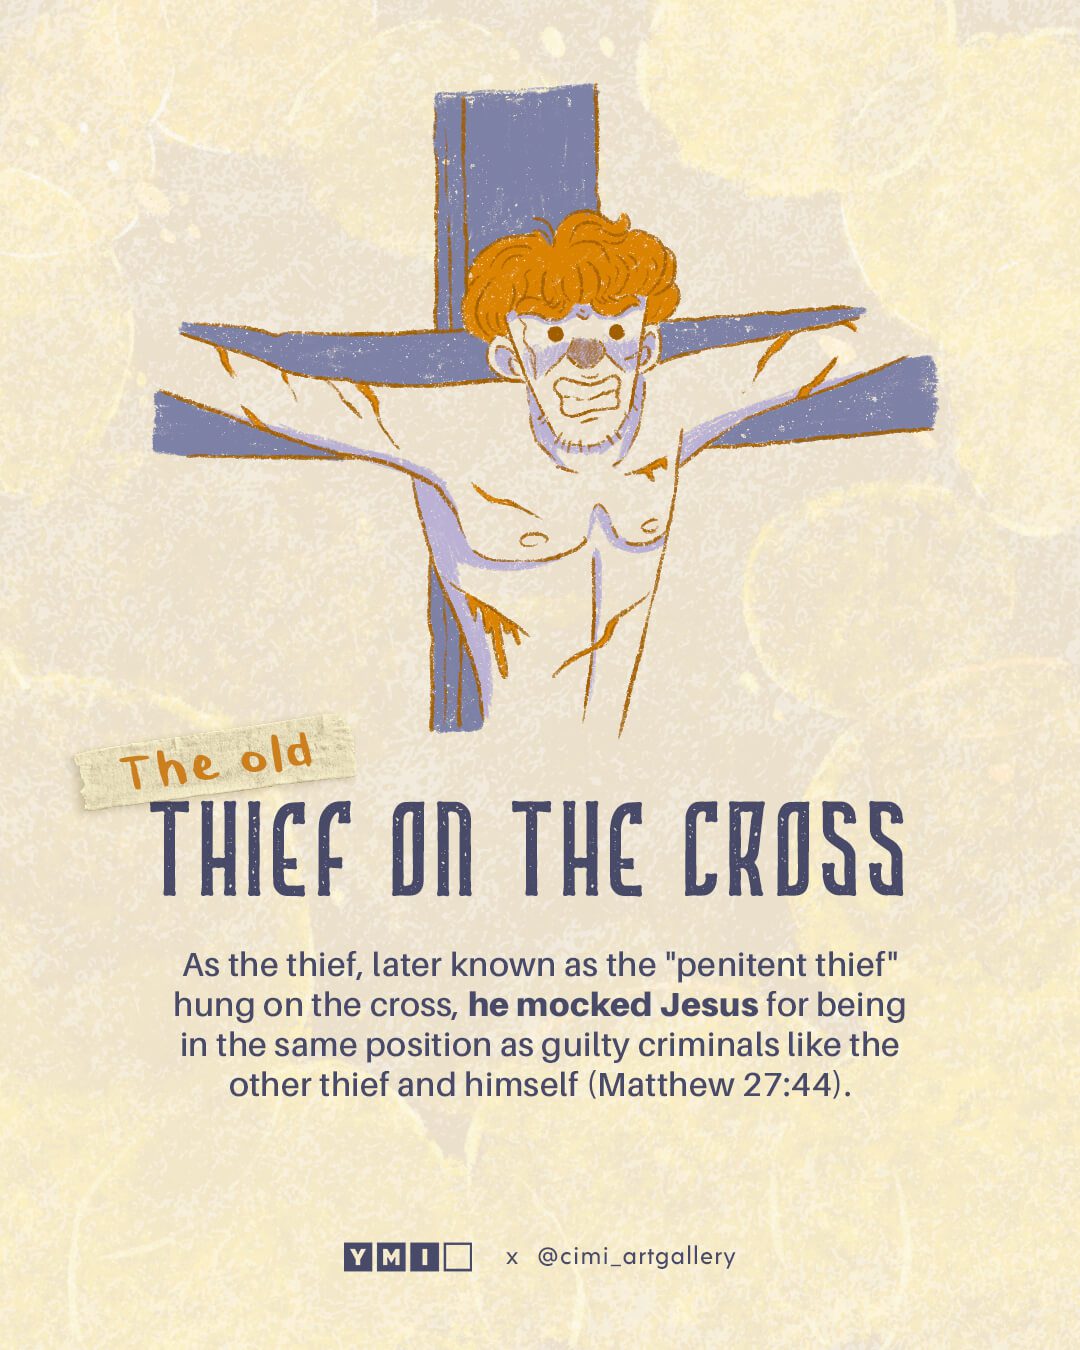 Illustration of the theif on the cross